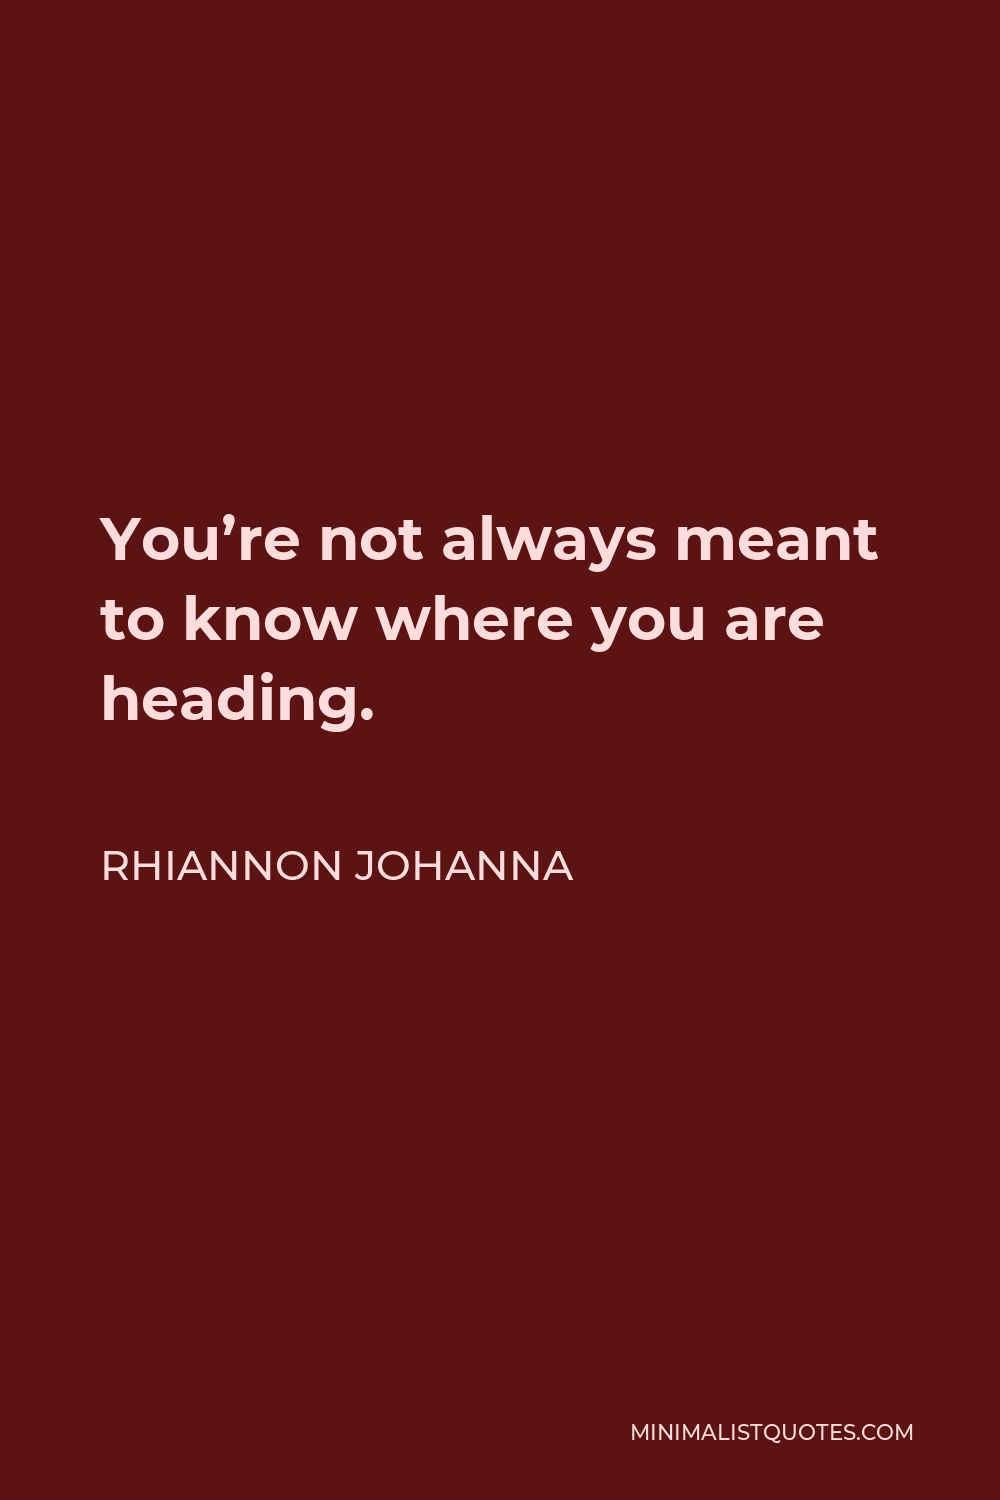 Rhiannon Johanna Quote - You’re not always meant to know where you are heading.